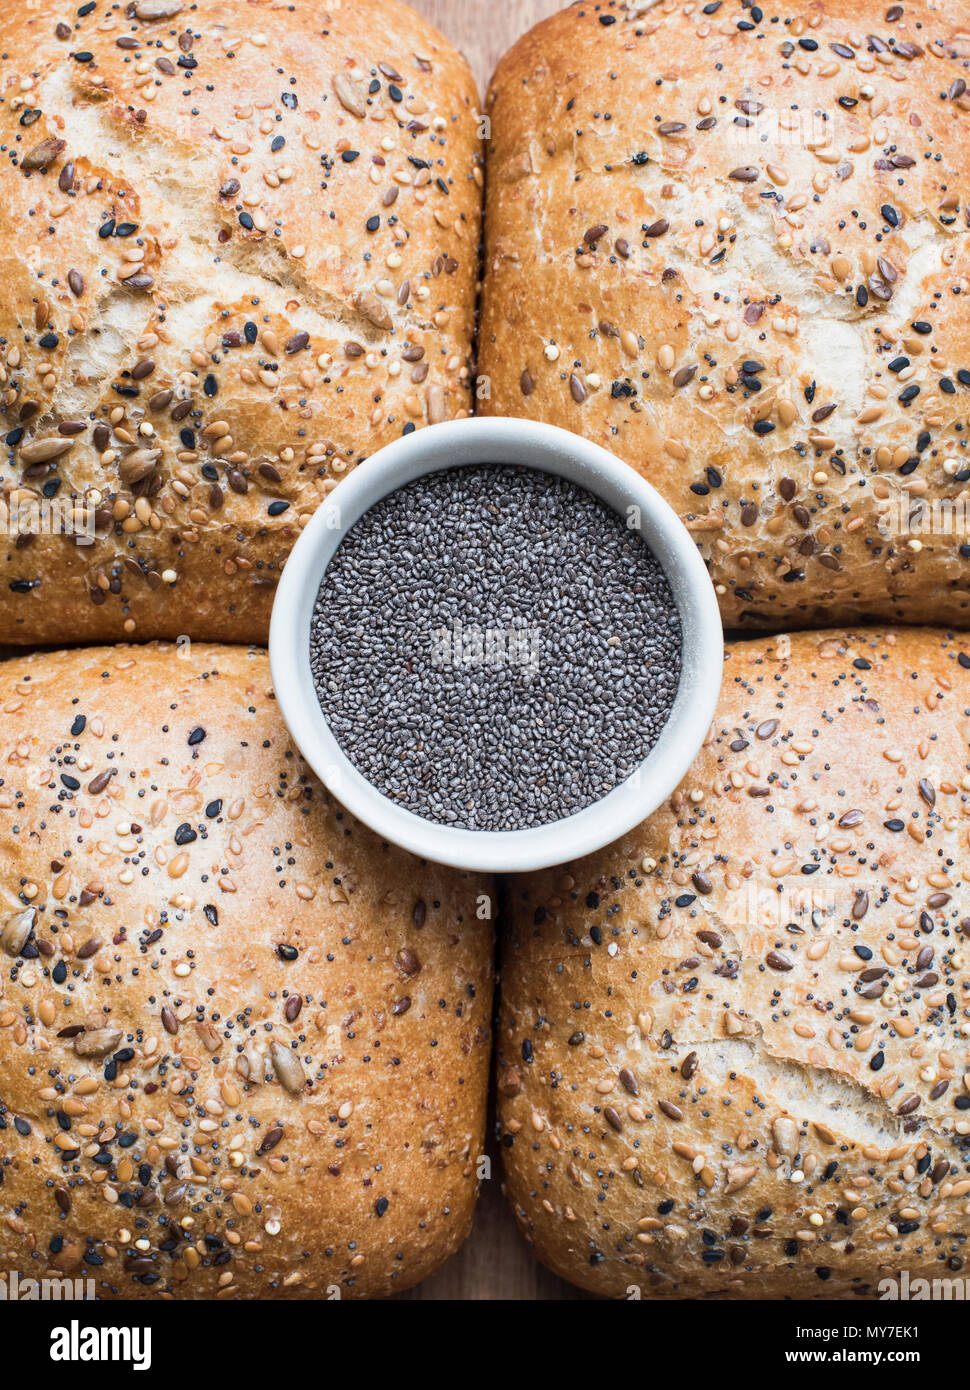 Multigrain bread rolls and bowl of chia seeds, close up overhead view Stock Photo